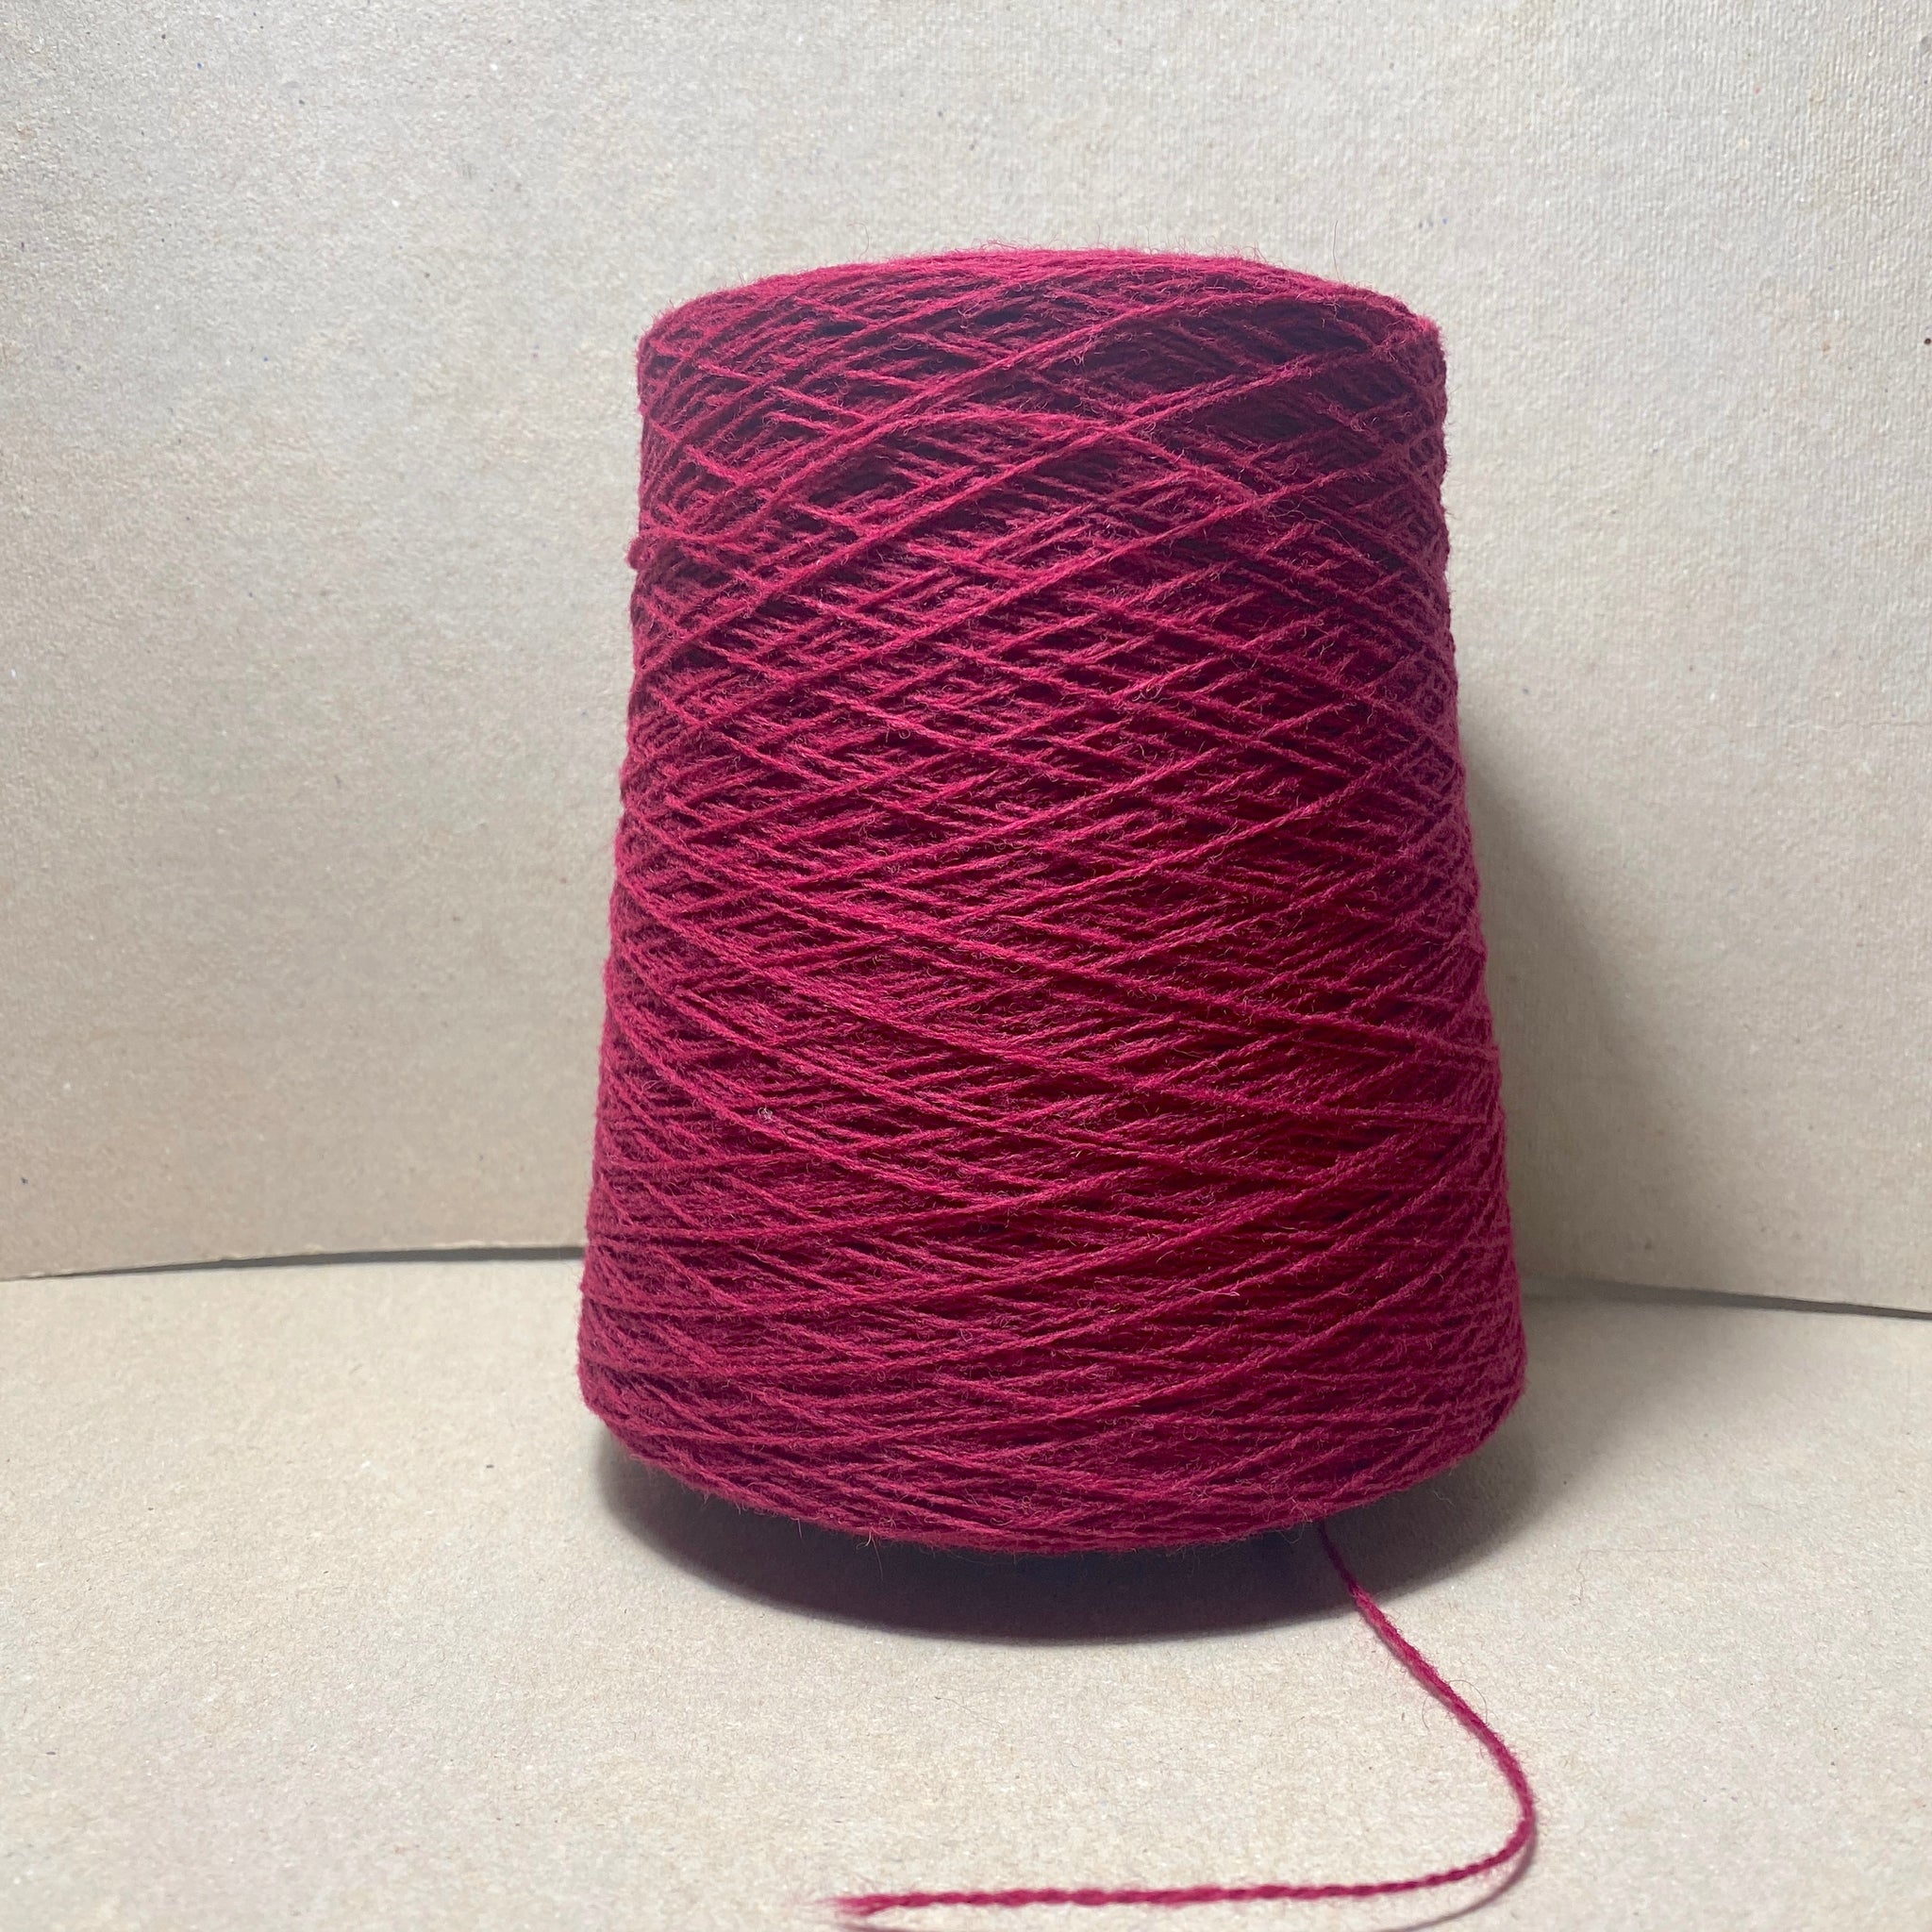 2 Ply Pure New Wool - Cranberry